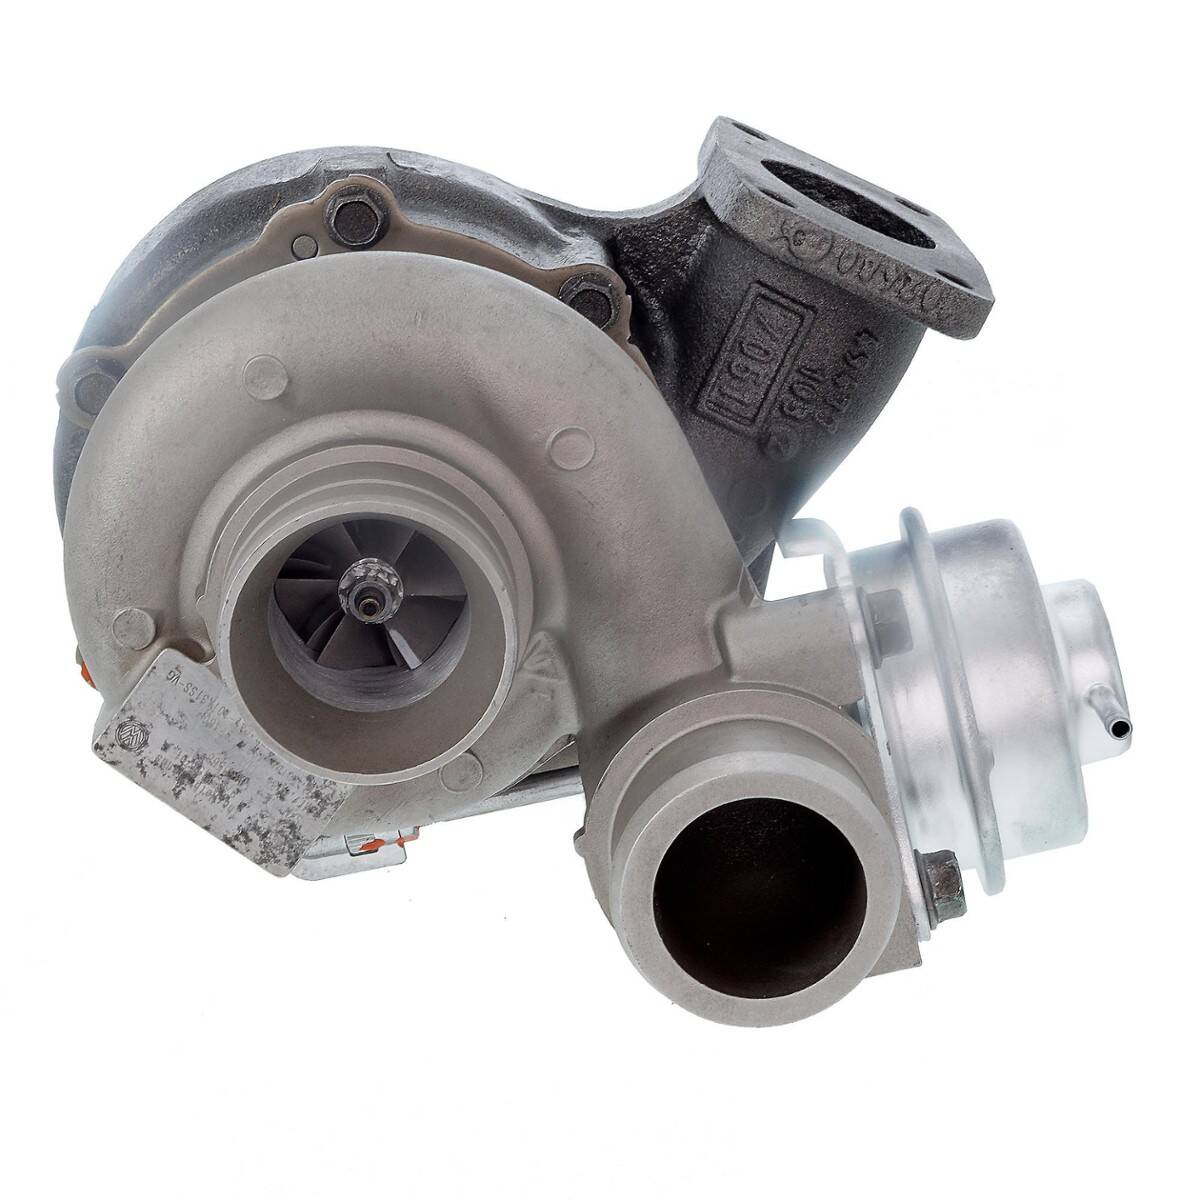 TURBOCHARGER TURBO REMANUFACTURED 49377-07423 49377-07460 49377-07423